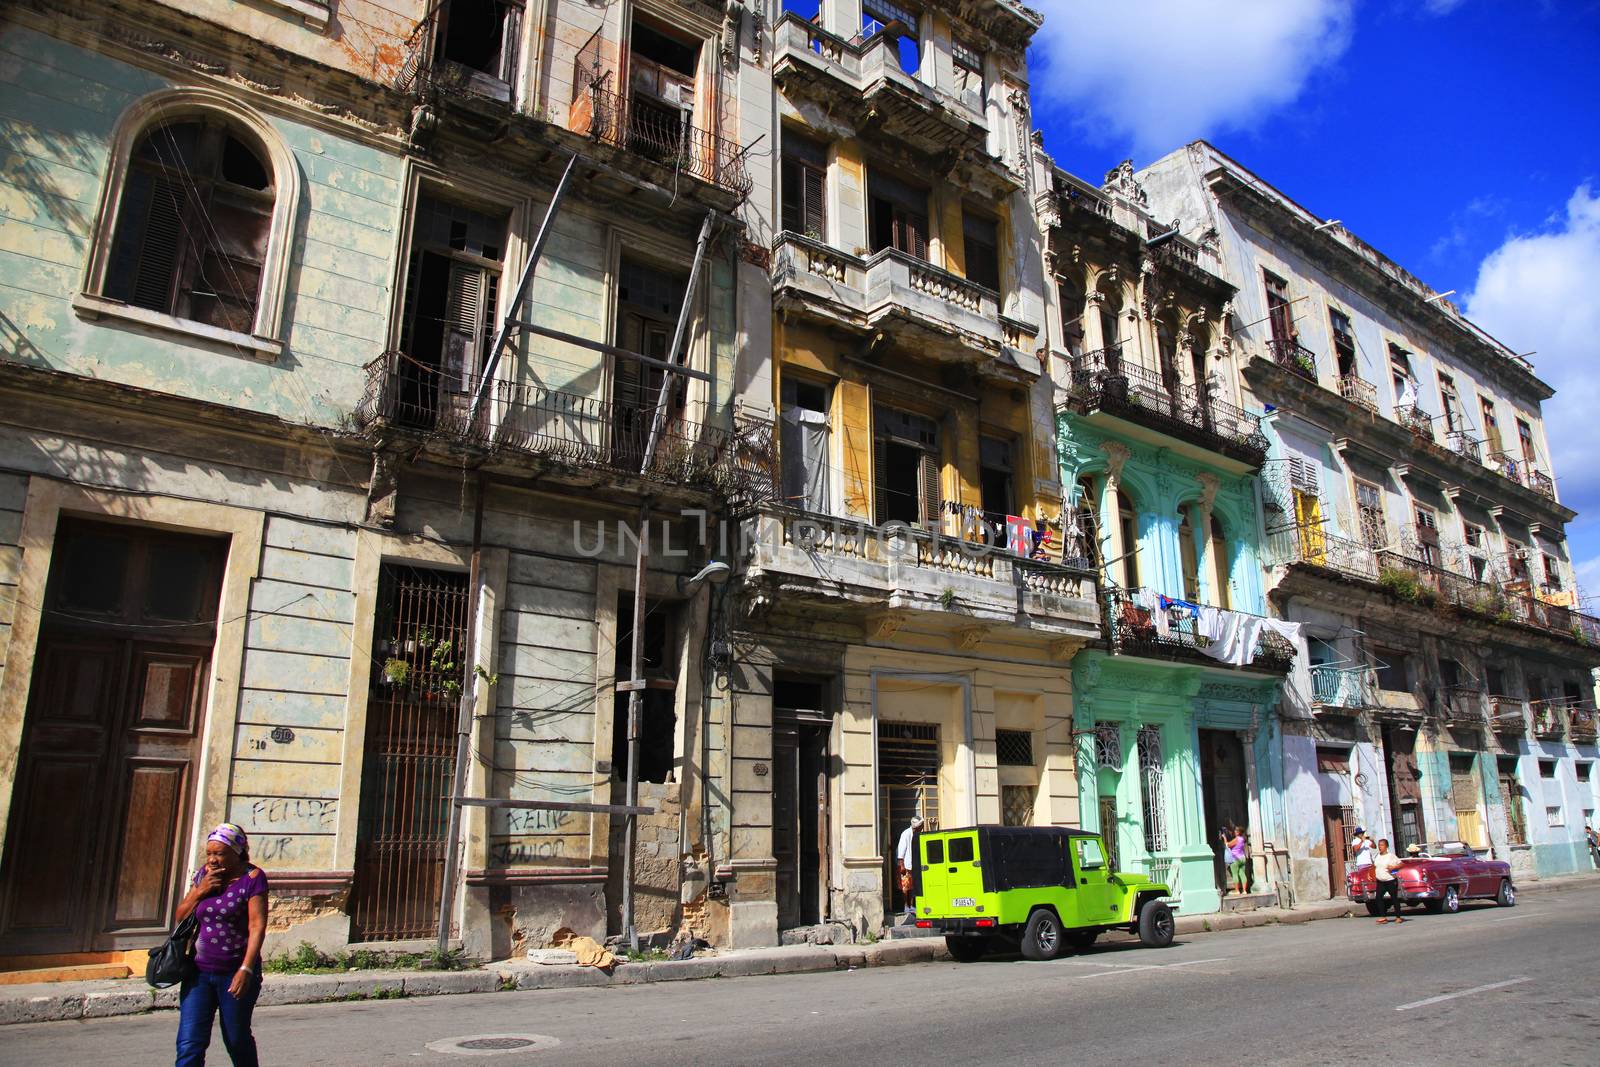 Vintage cars on the streets of colorful Havana by friday